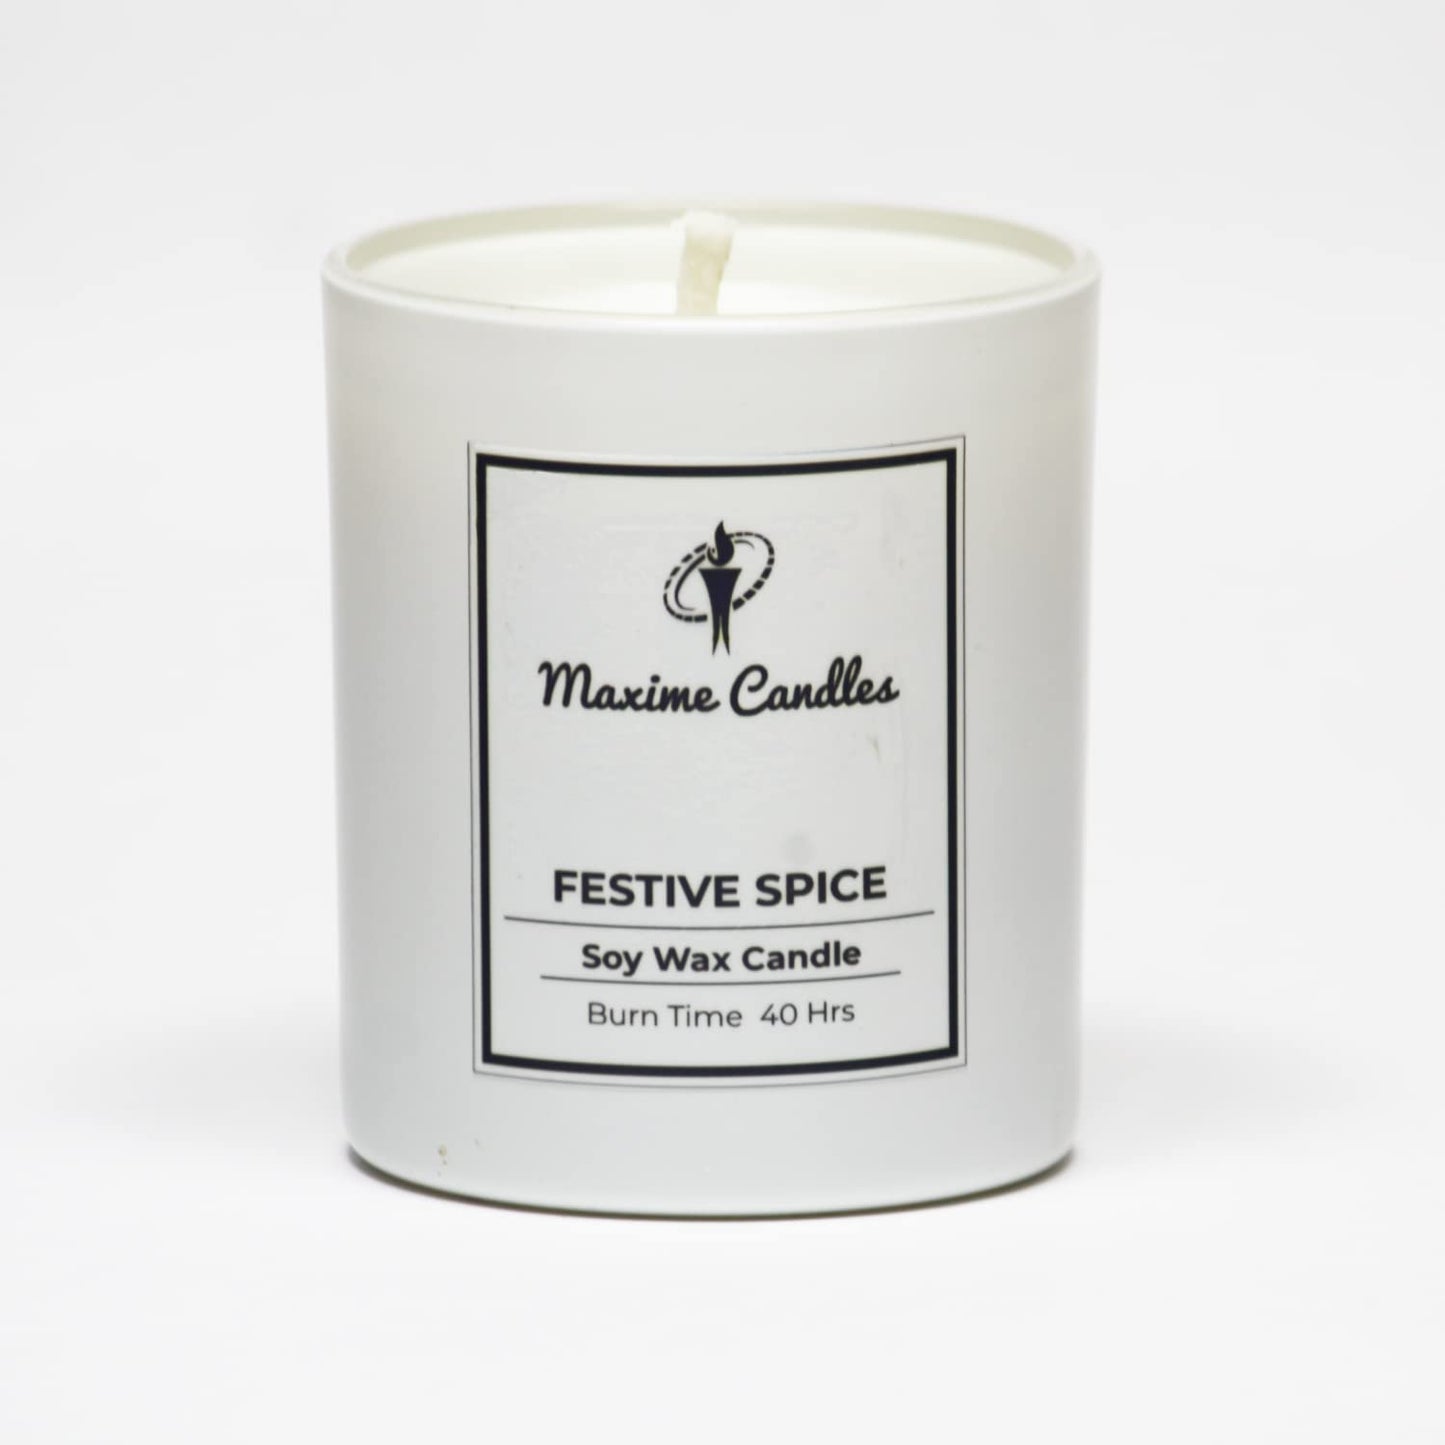 Festive Spice Fragranced Soy Wax White Glass Jar Scented Candle